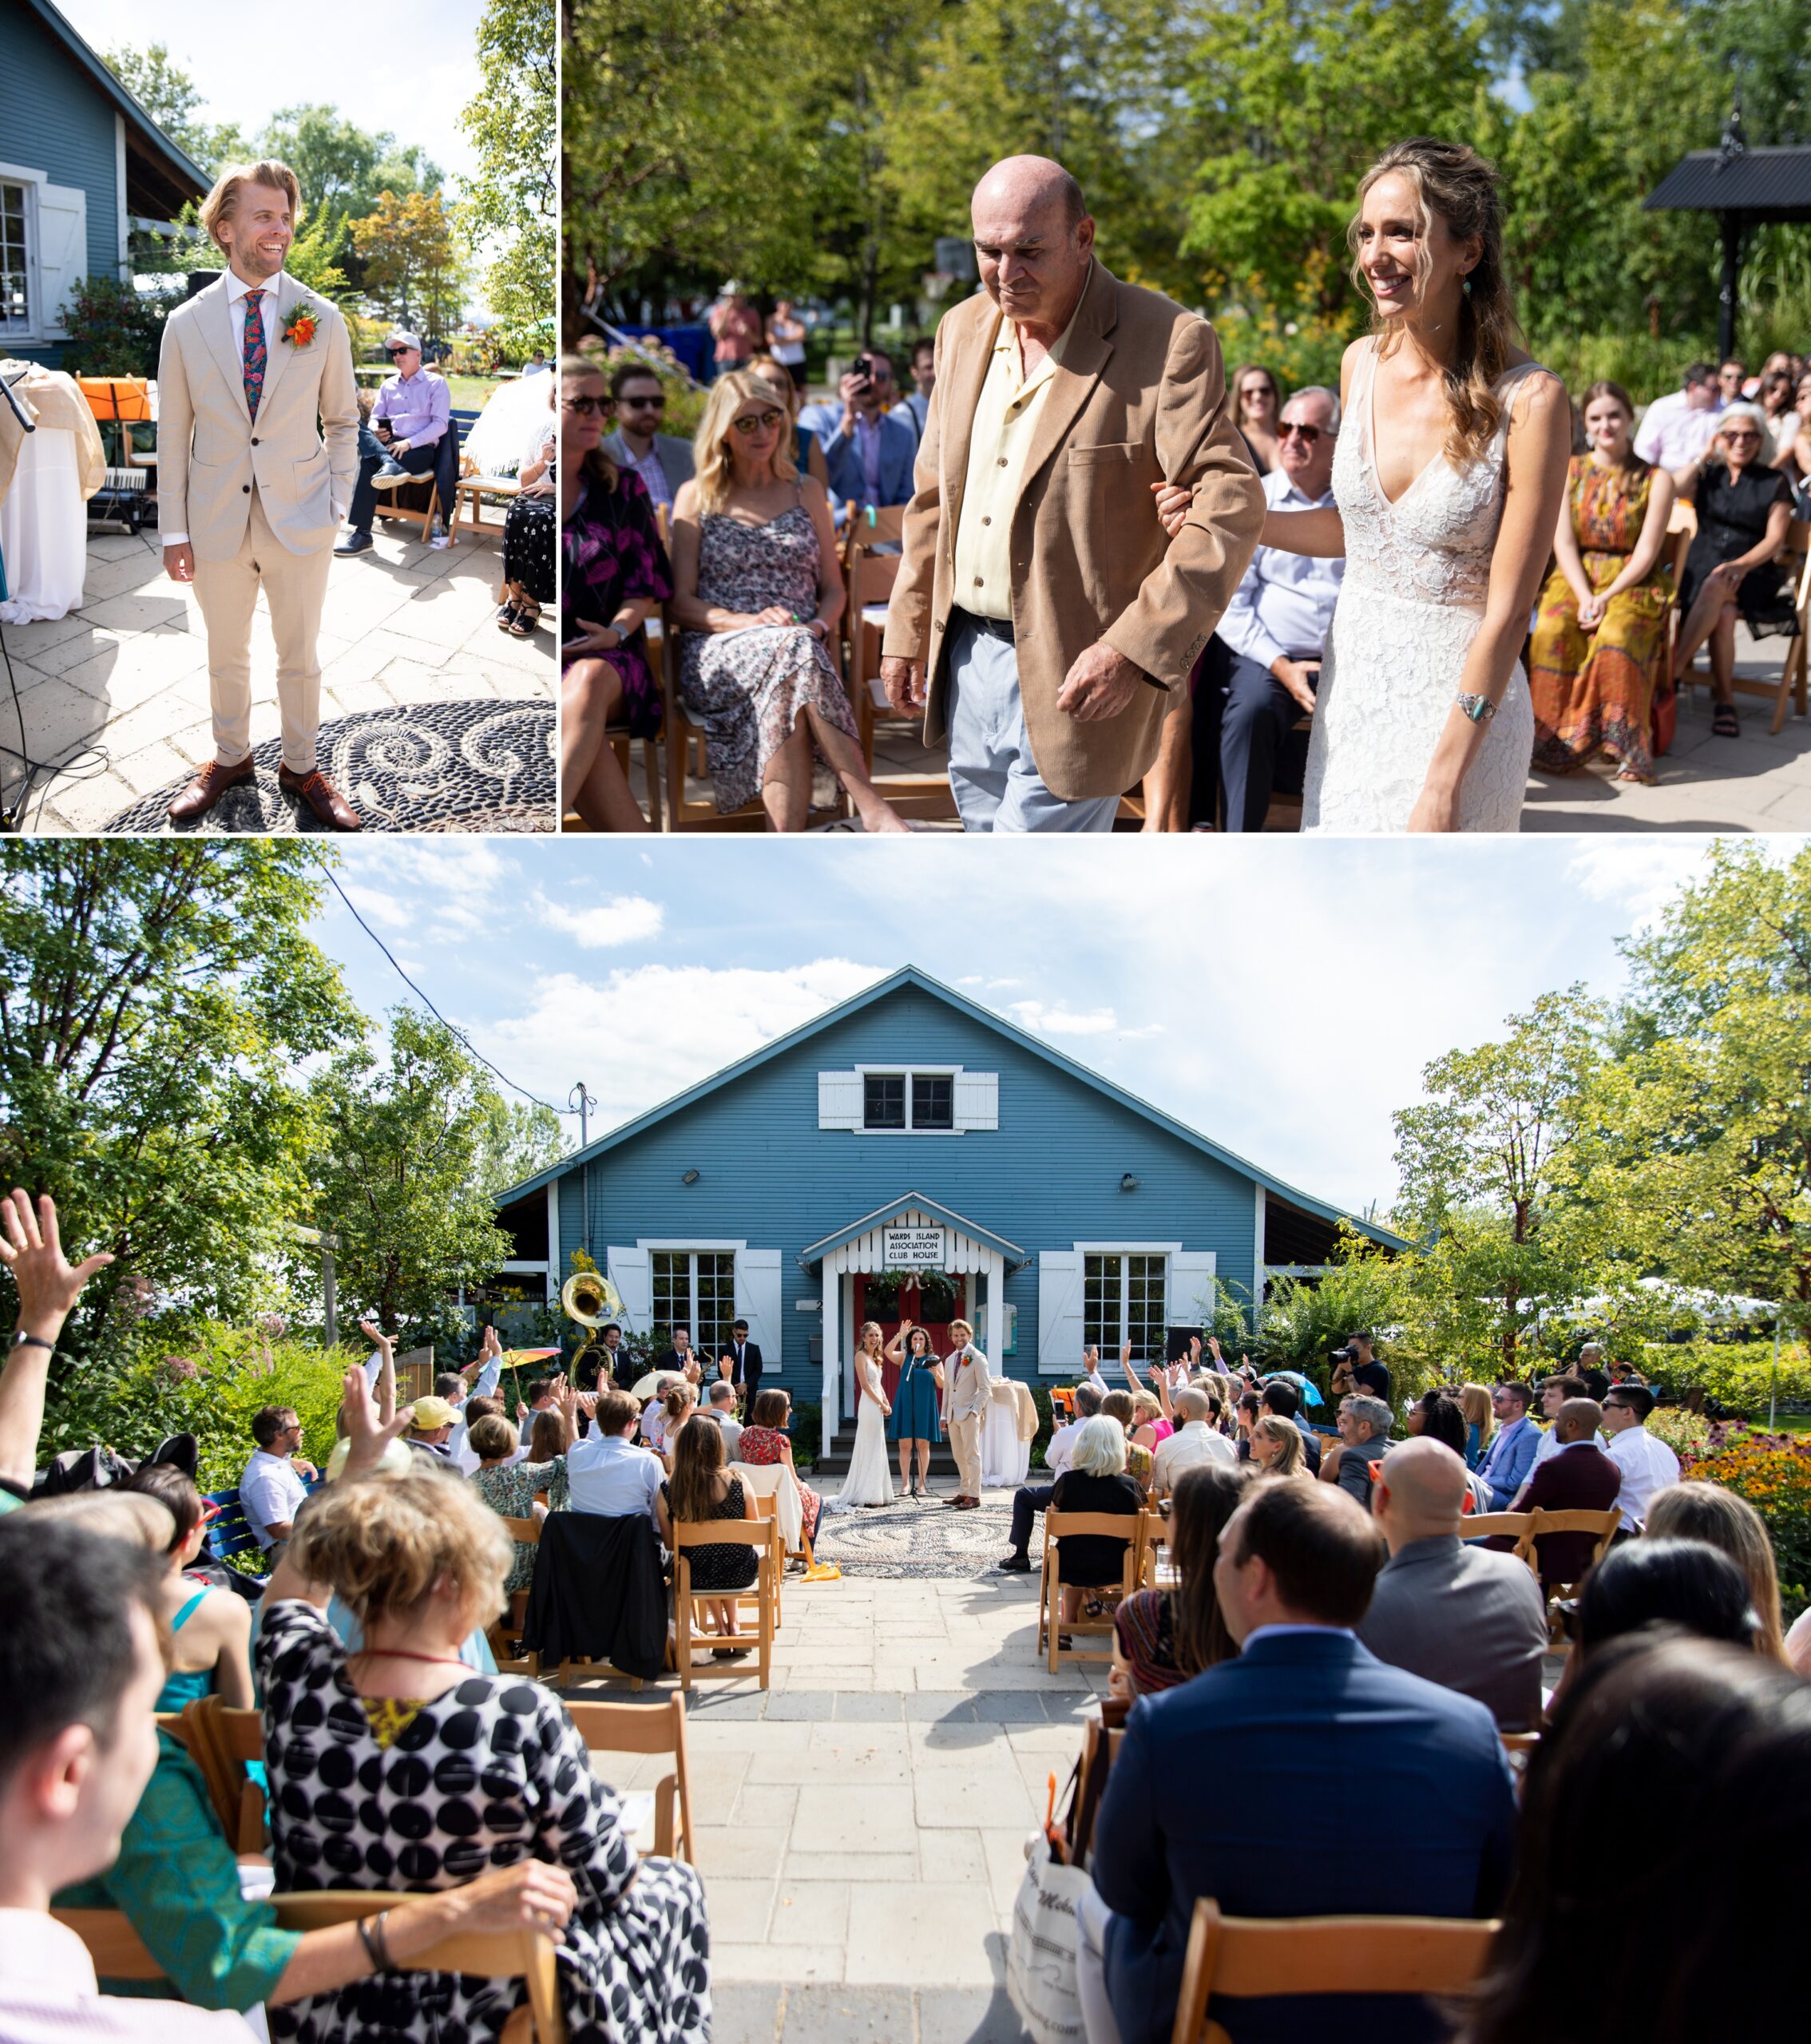 Wedding ceremony, bride walking down aisle with dad, wide ceremony view with guests